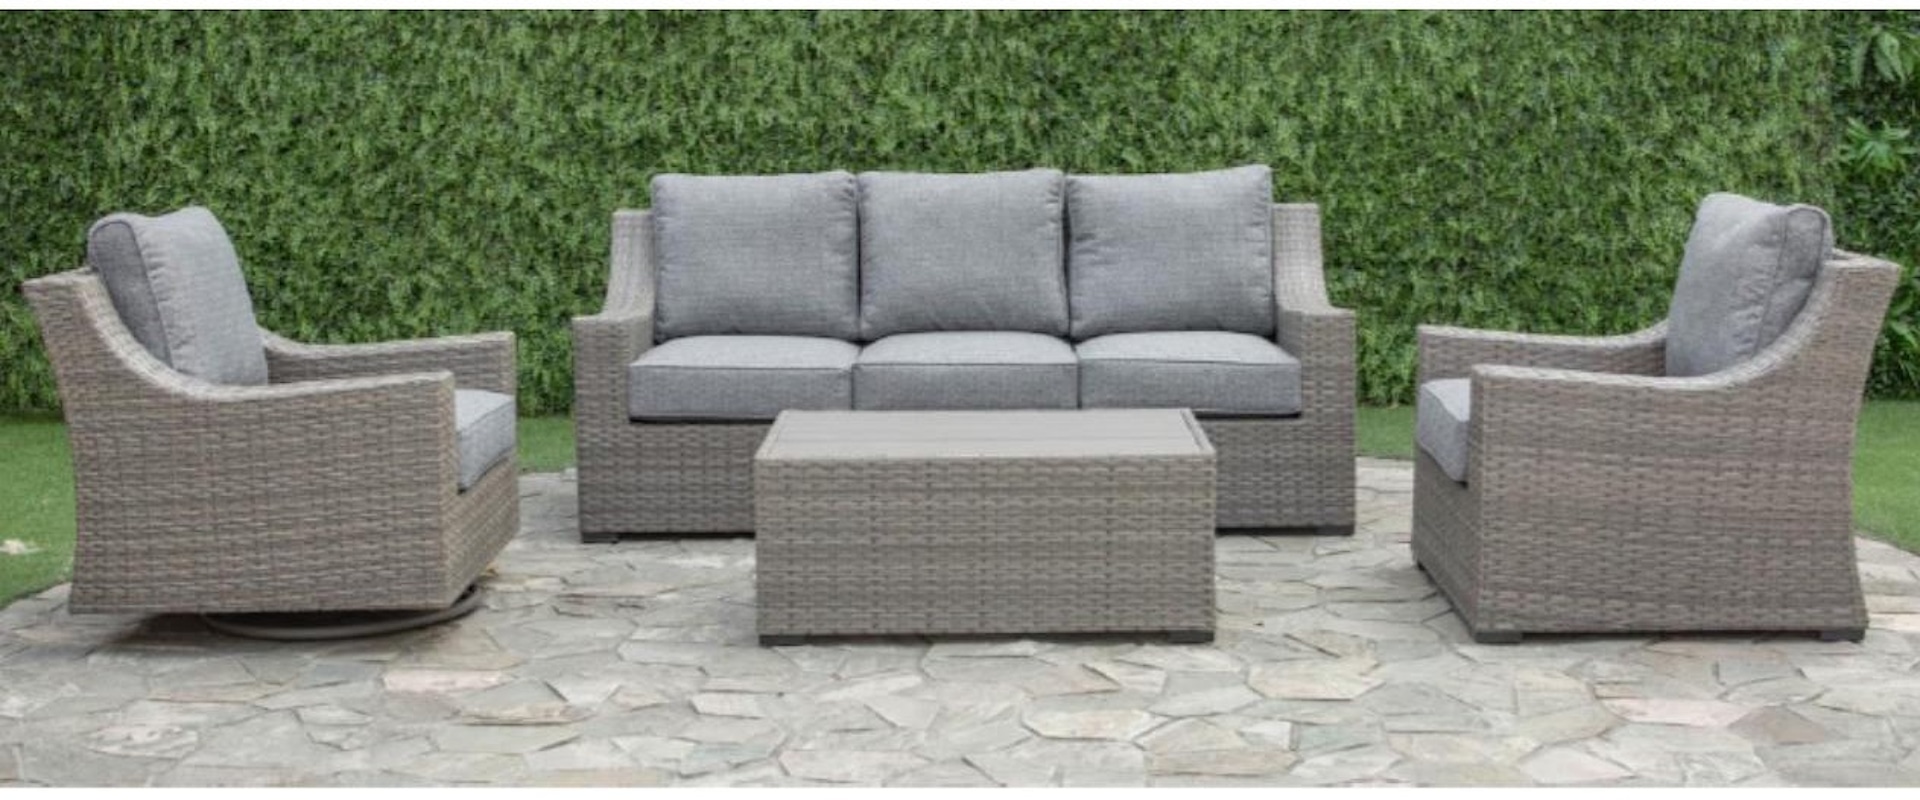 Outdoor Wicker Sofa, Chair and Cocktail Table with Aluminum Frame